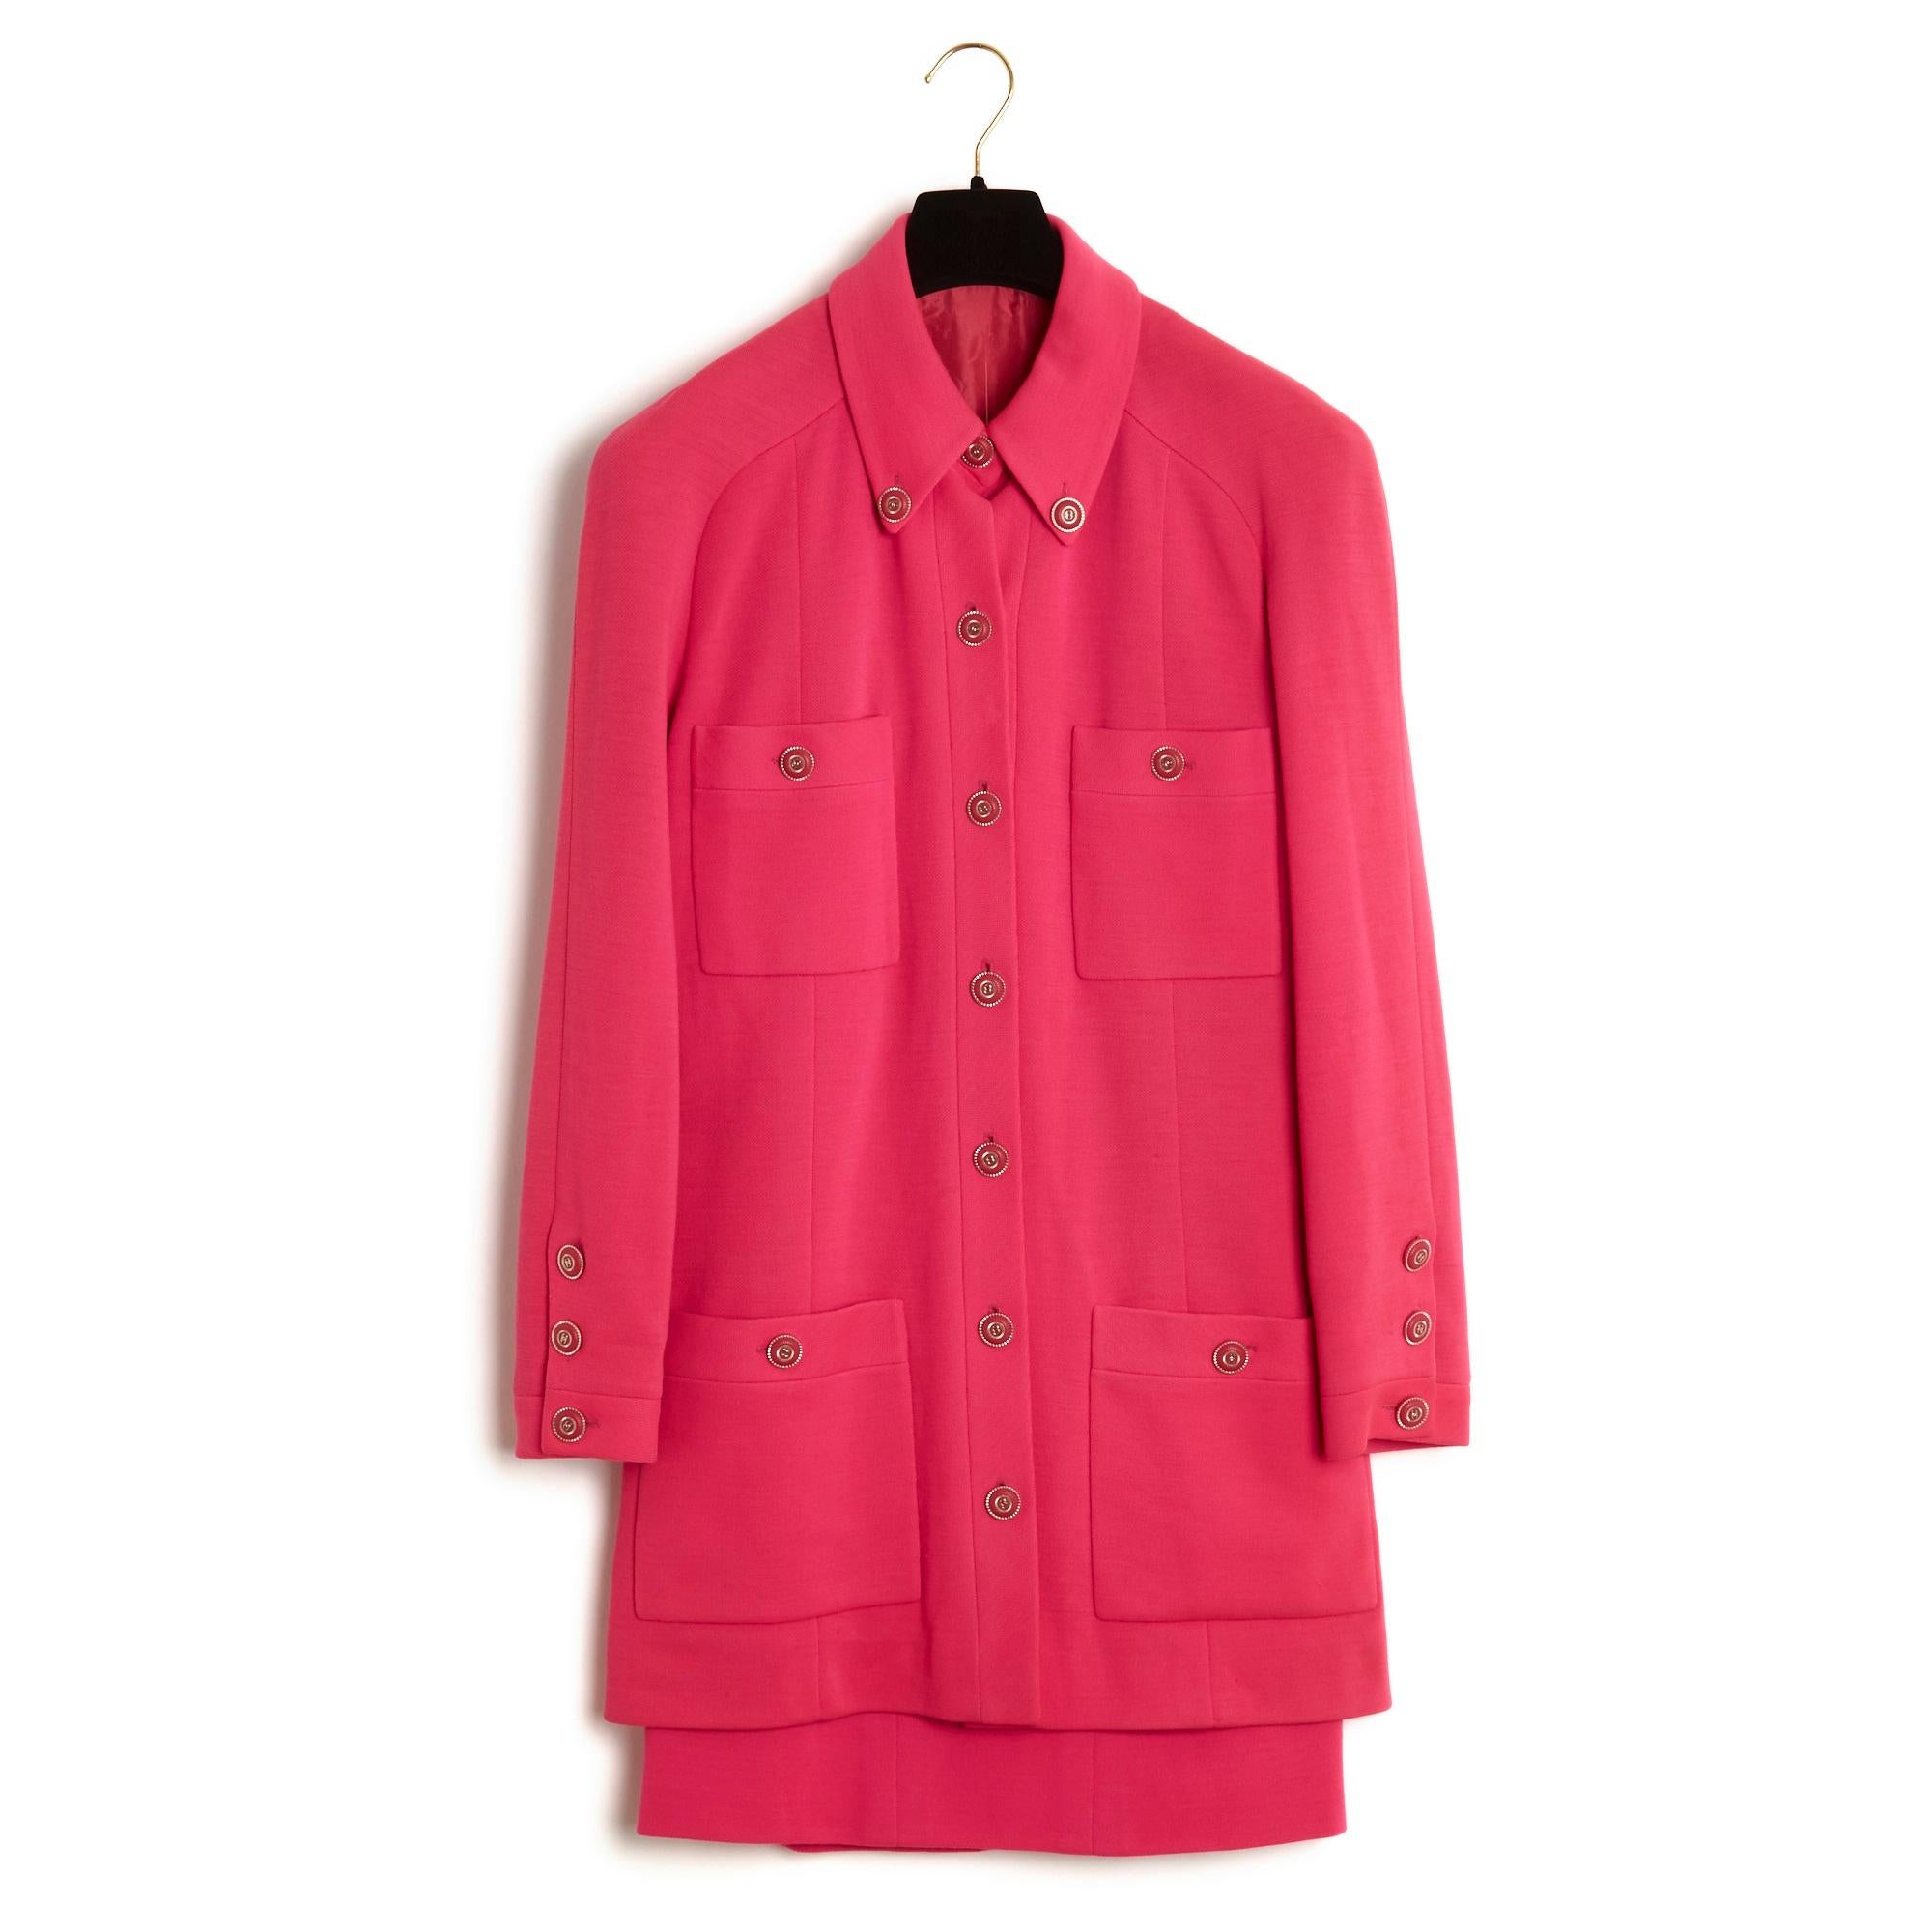 Chanel Haute Couture set circa 1994 in strong pink wool composed of a jacket, wide and mid-length straight cut, buttoned collar closed all the way with 7 buttons, 4 buttoned patch pockets, long raglan sleeves closed with 3 buttons, and a straight